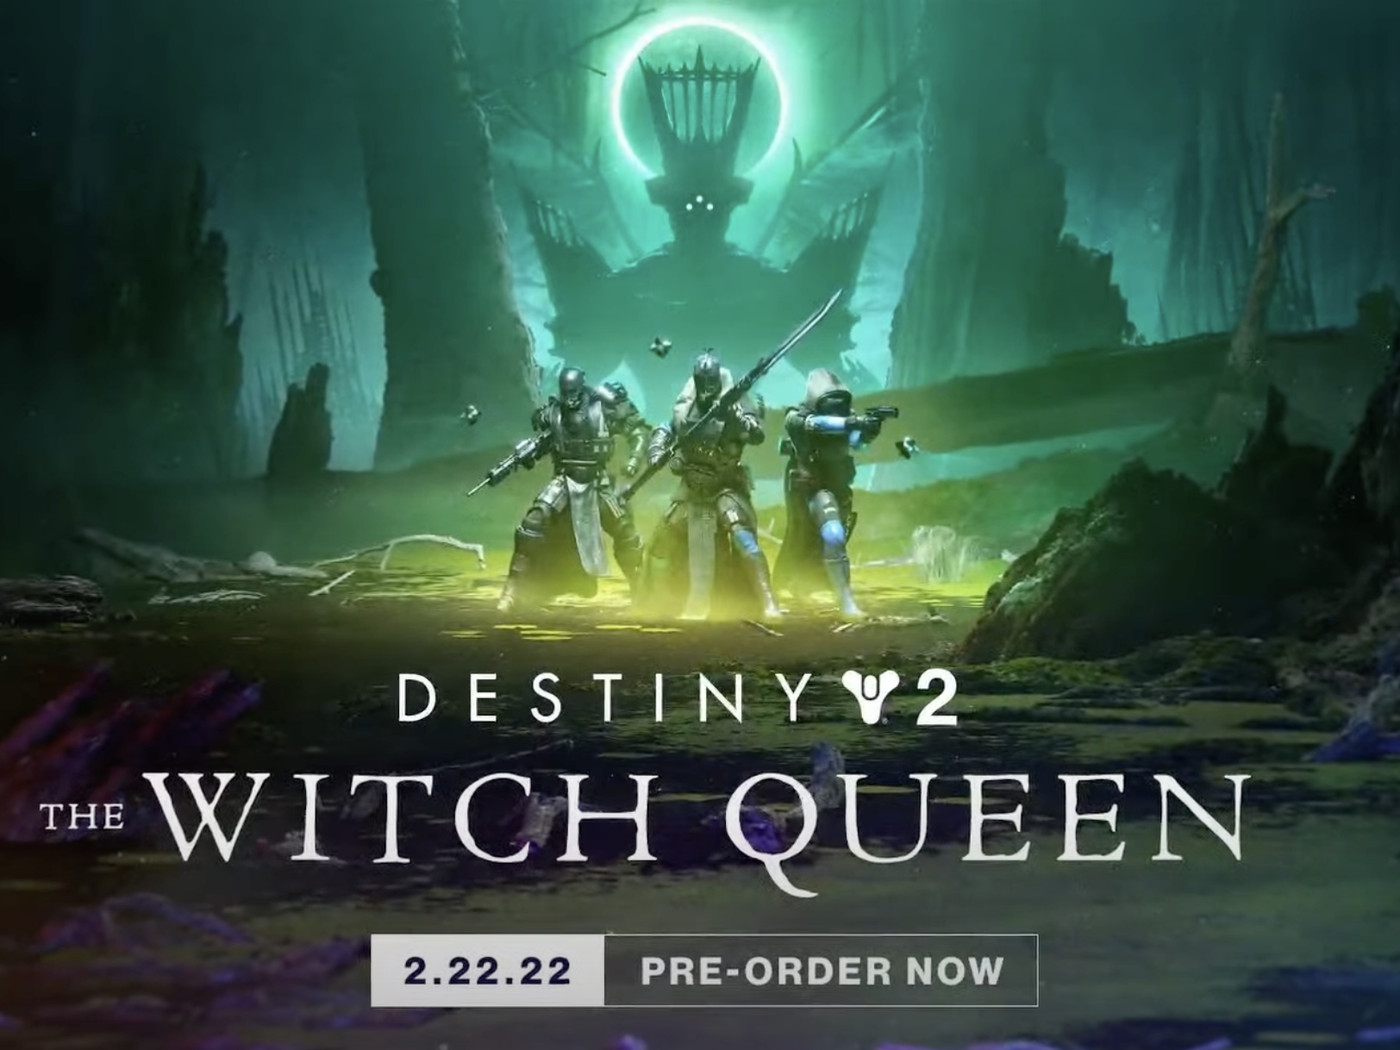 Destiny 2: The Witch Queen offers the game's biggest expansion in years on February 22nd